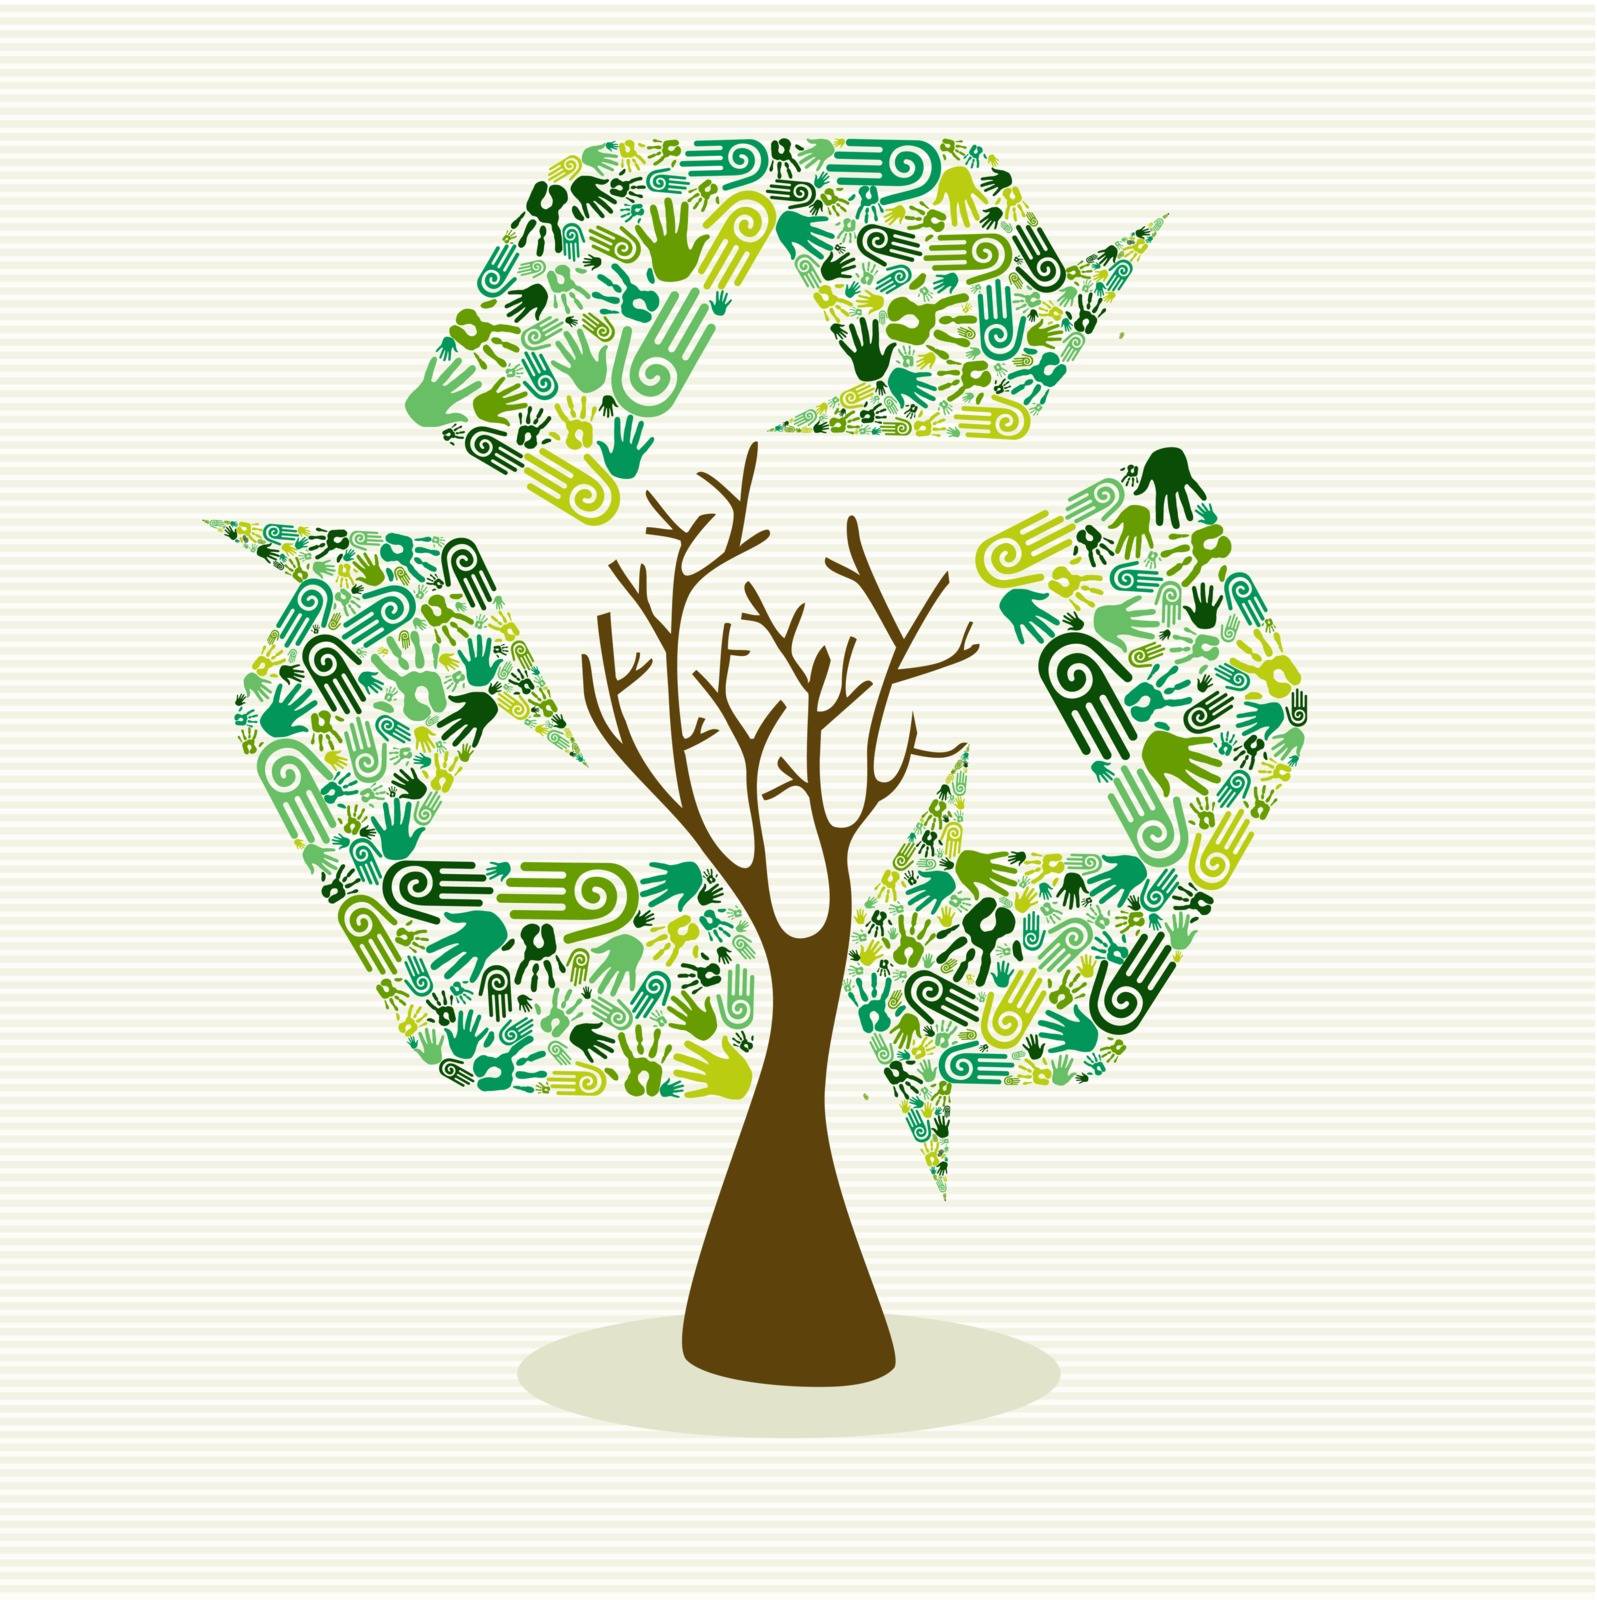 Human hands recycle symbol shape tree. This vector illustration is layered for easy manipulation and custom coloring